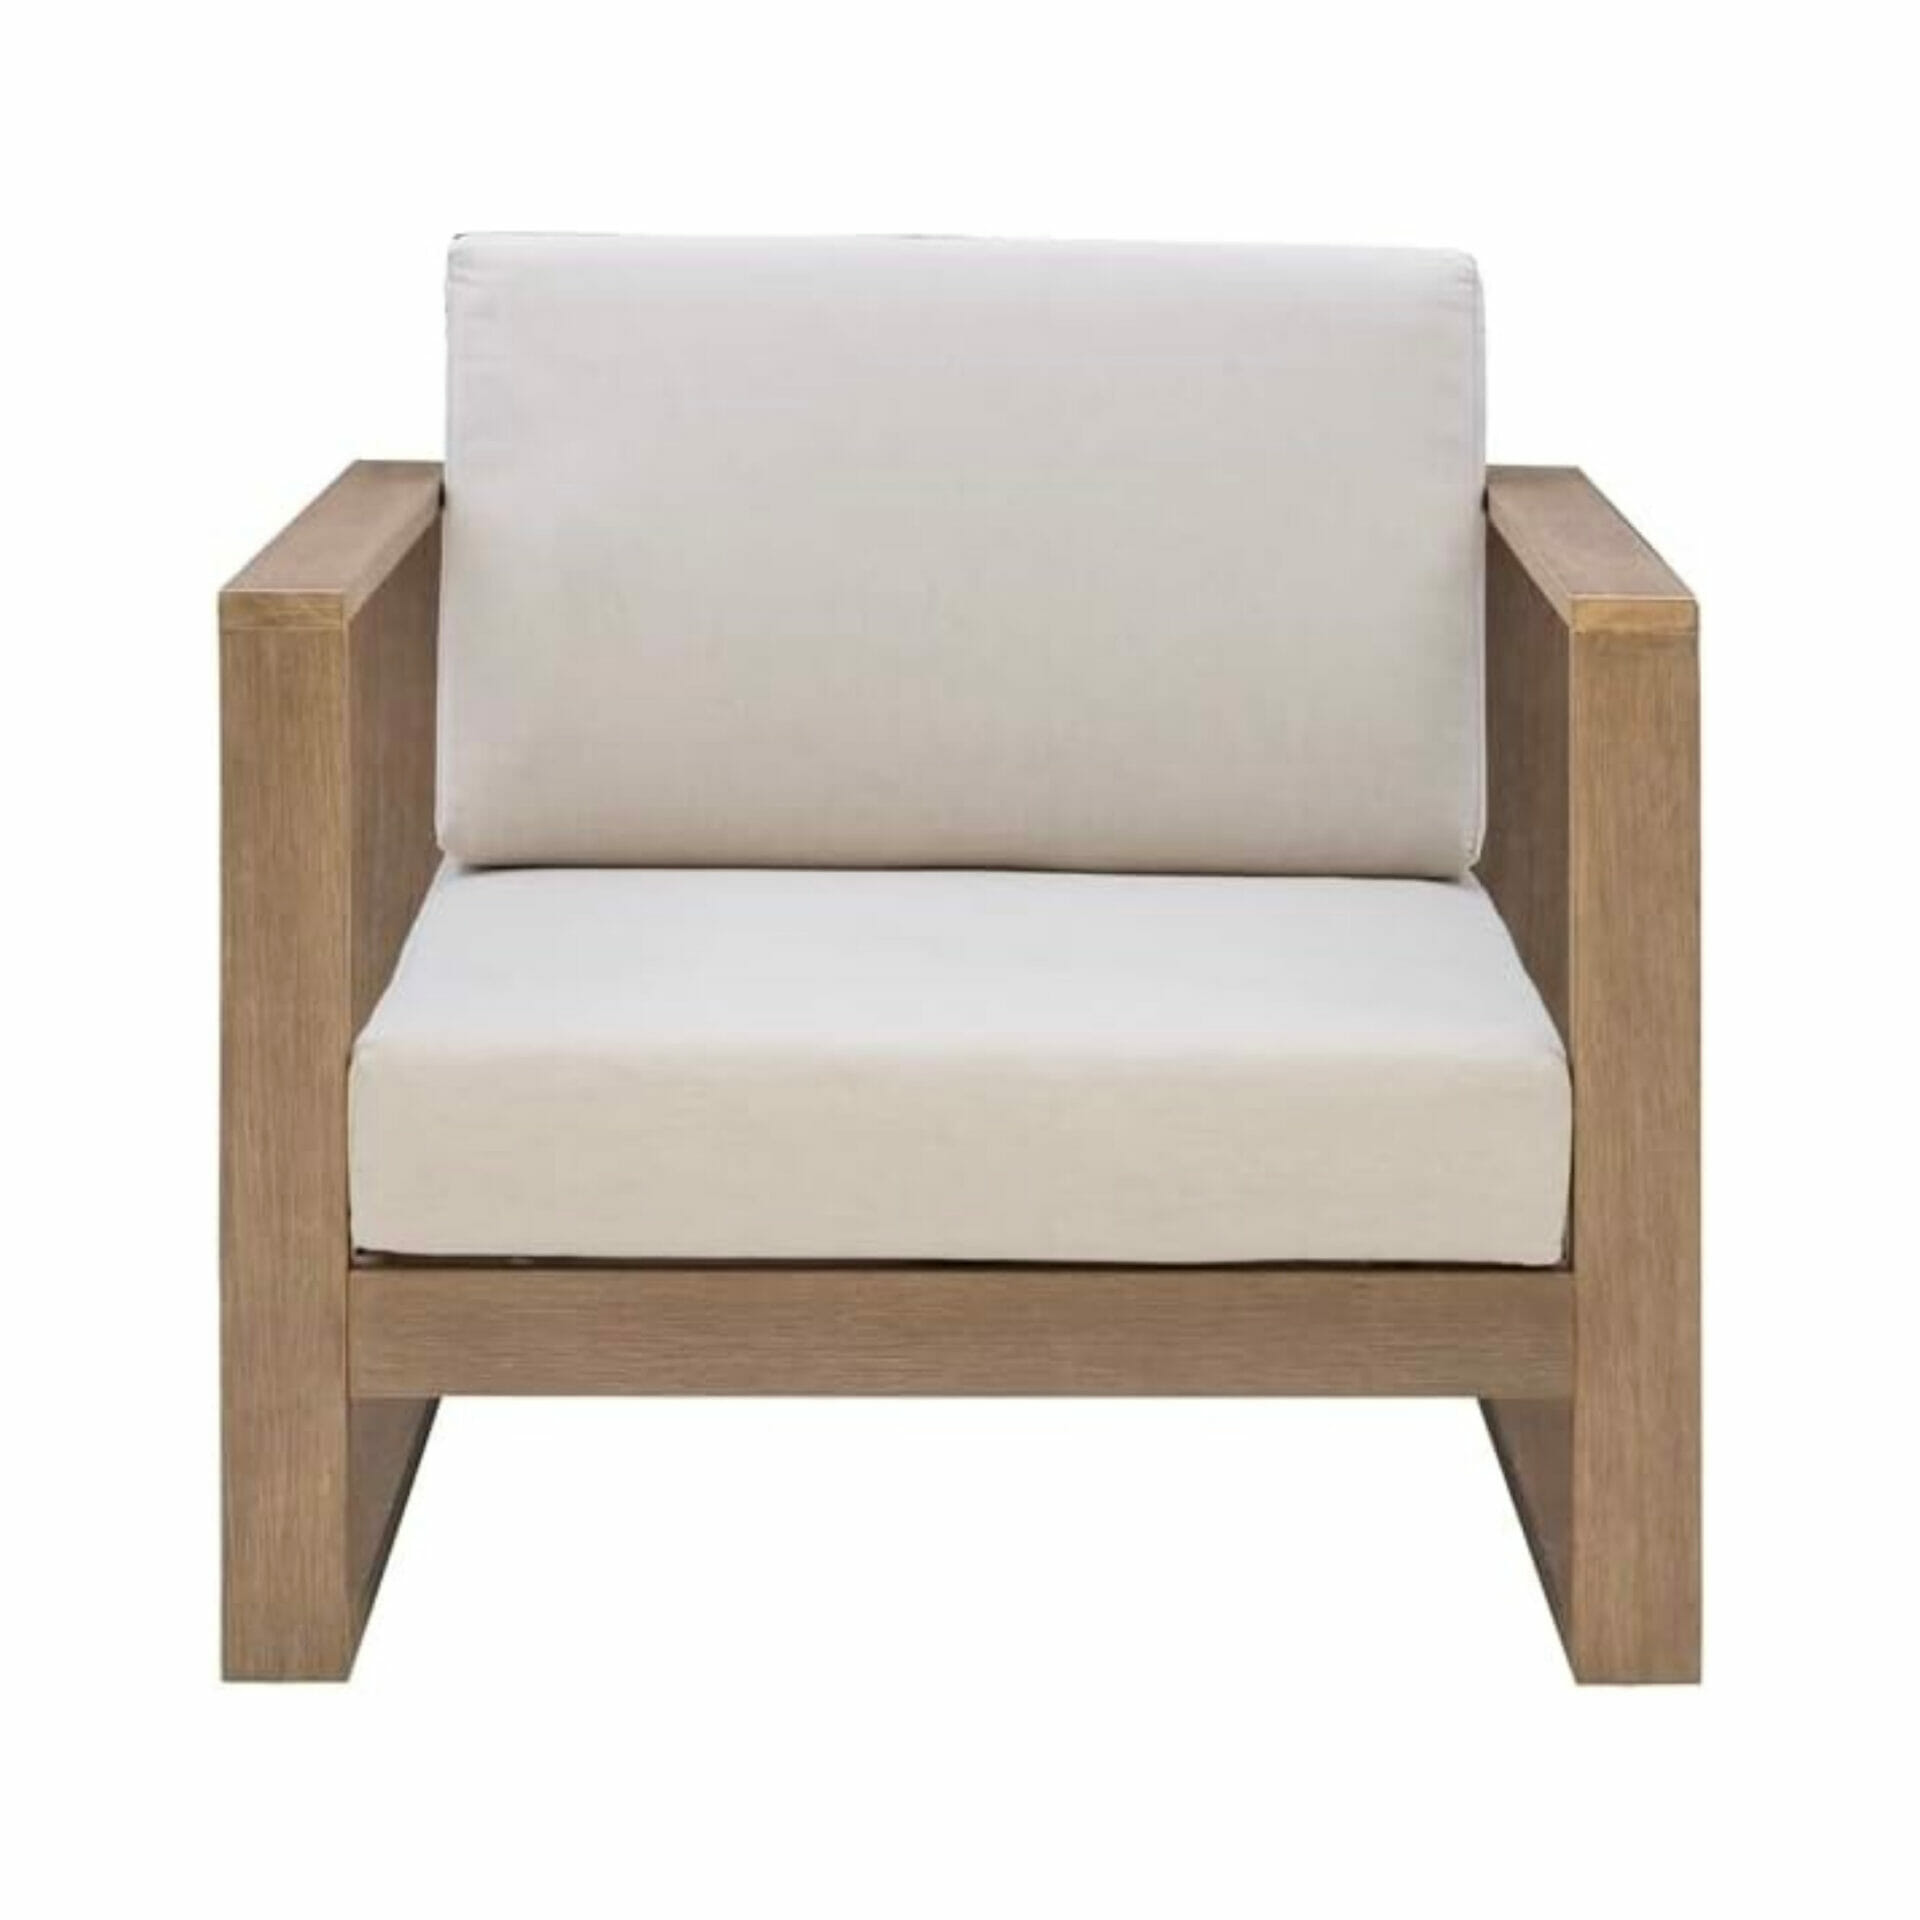 outdoor restoration hardware west elm pottery barn lookalike eucalyptus patio home decor seating accent chair wood